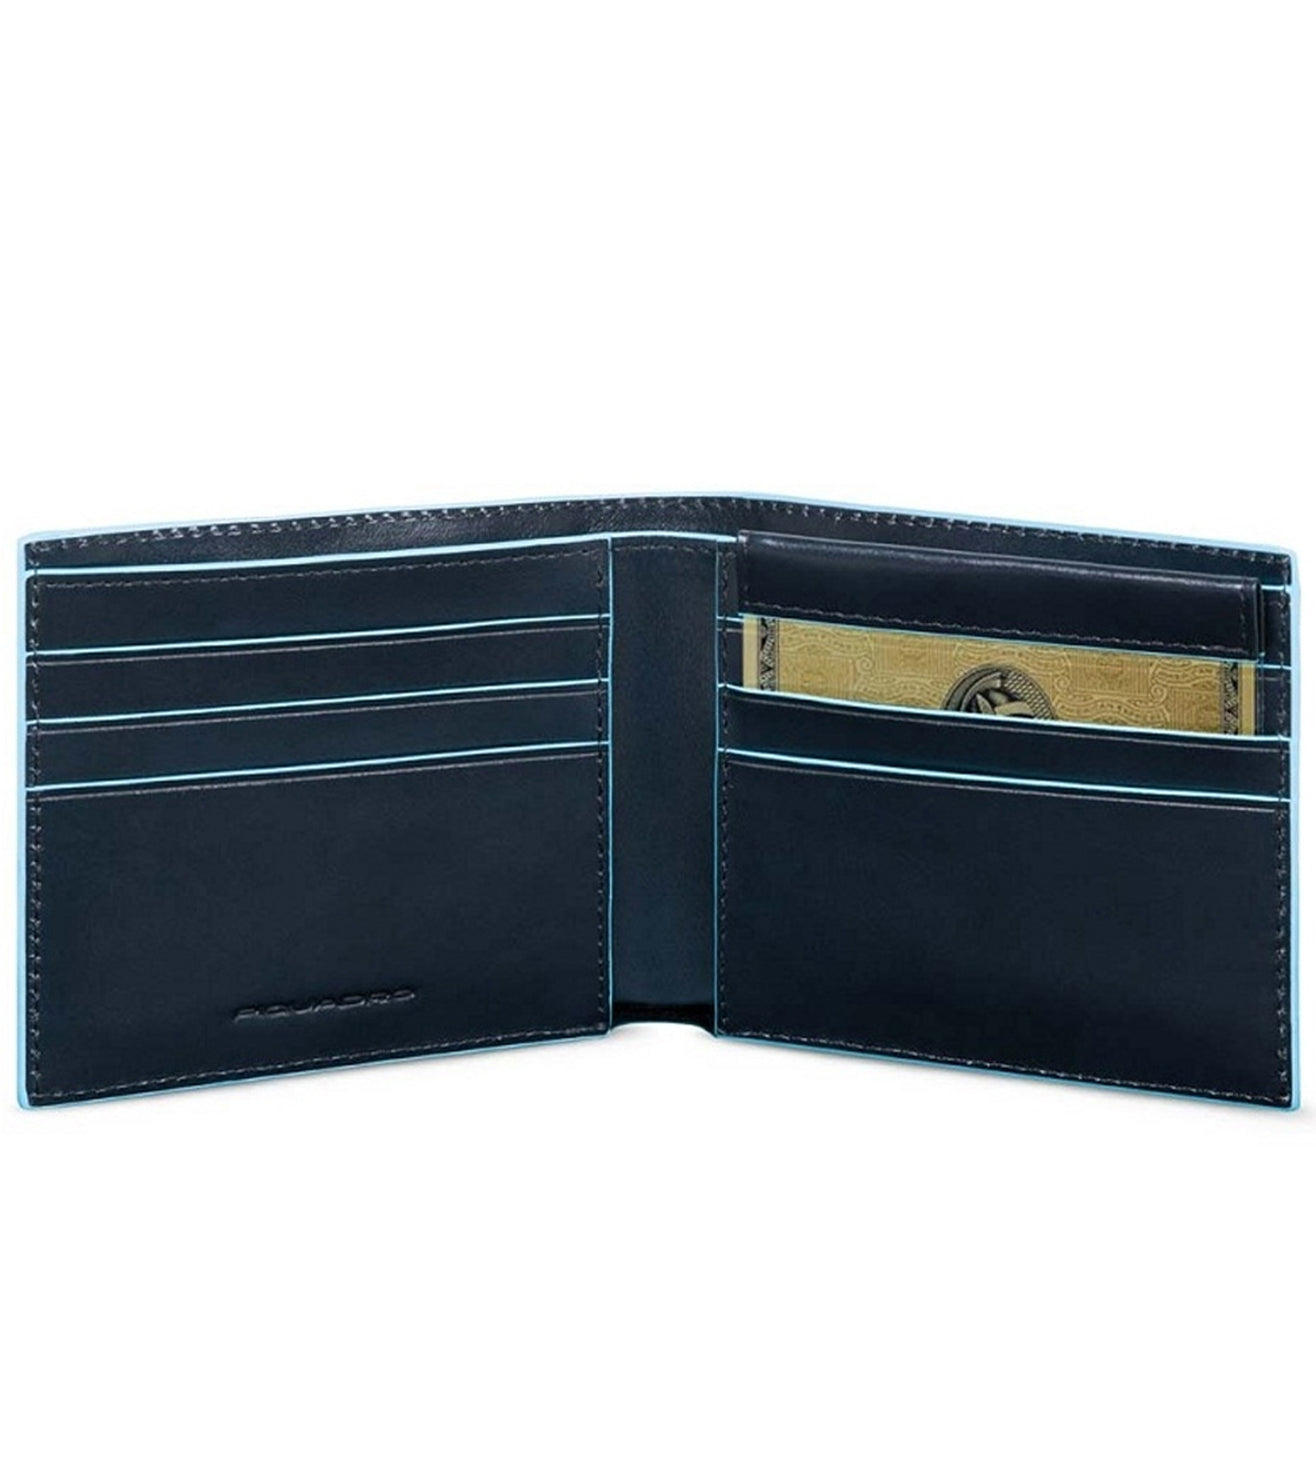 Piquadro Blue Square Men's wallet with money clip – Travel and